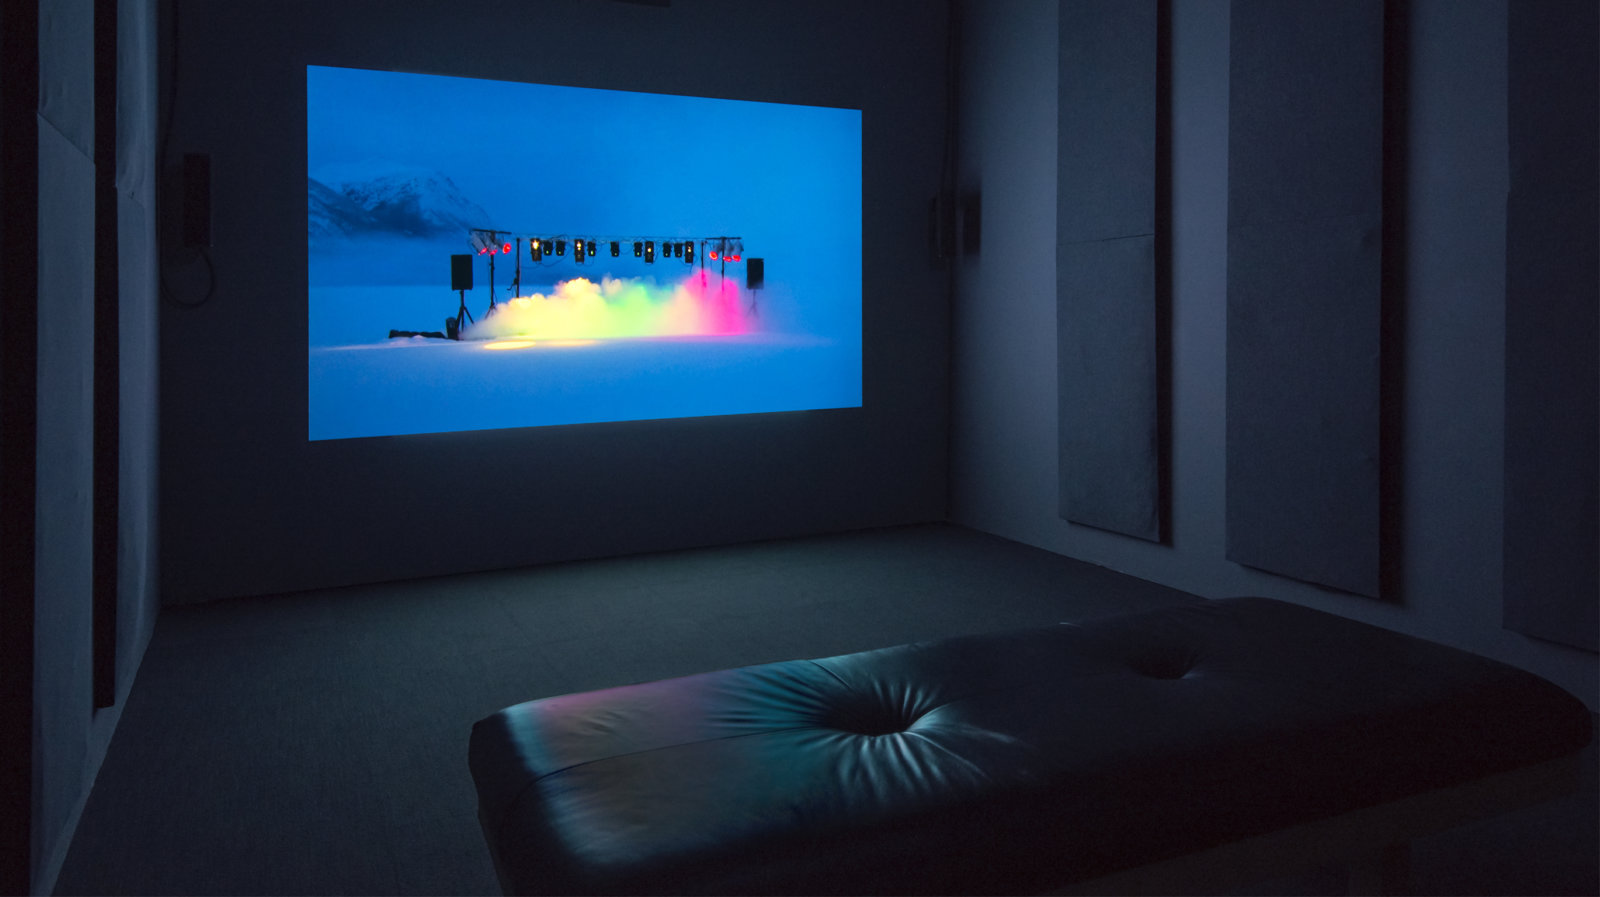 Kevin Schmidt, Wild Signals, 2007, HD video projection, 9 minutes, 42 seconds. Installation view, The Commons, Kamloops Art Gallery, Kamloops, Canada, 2015